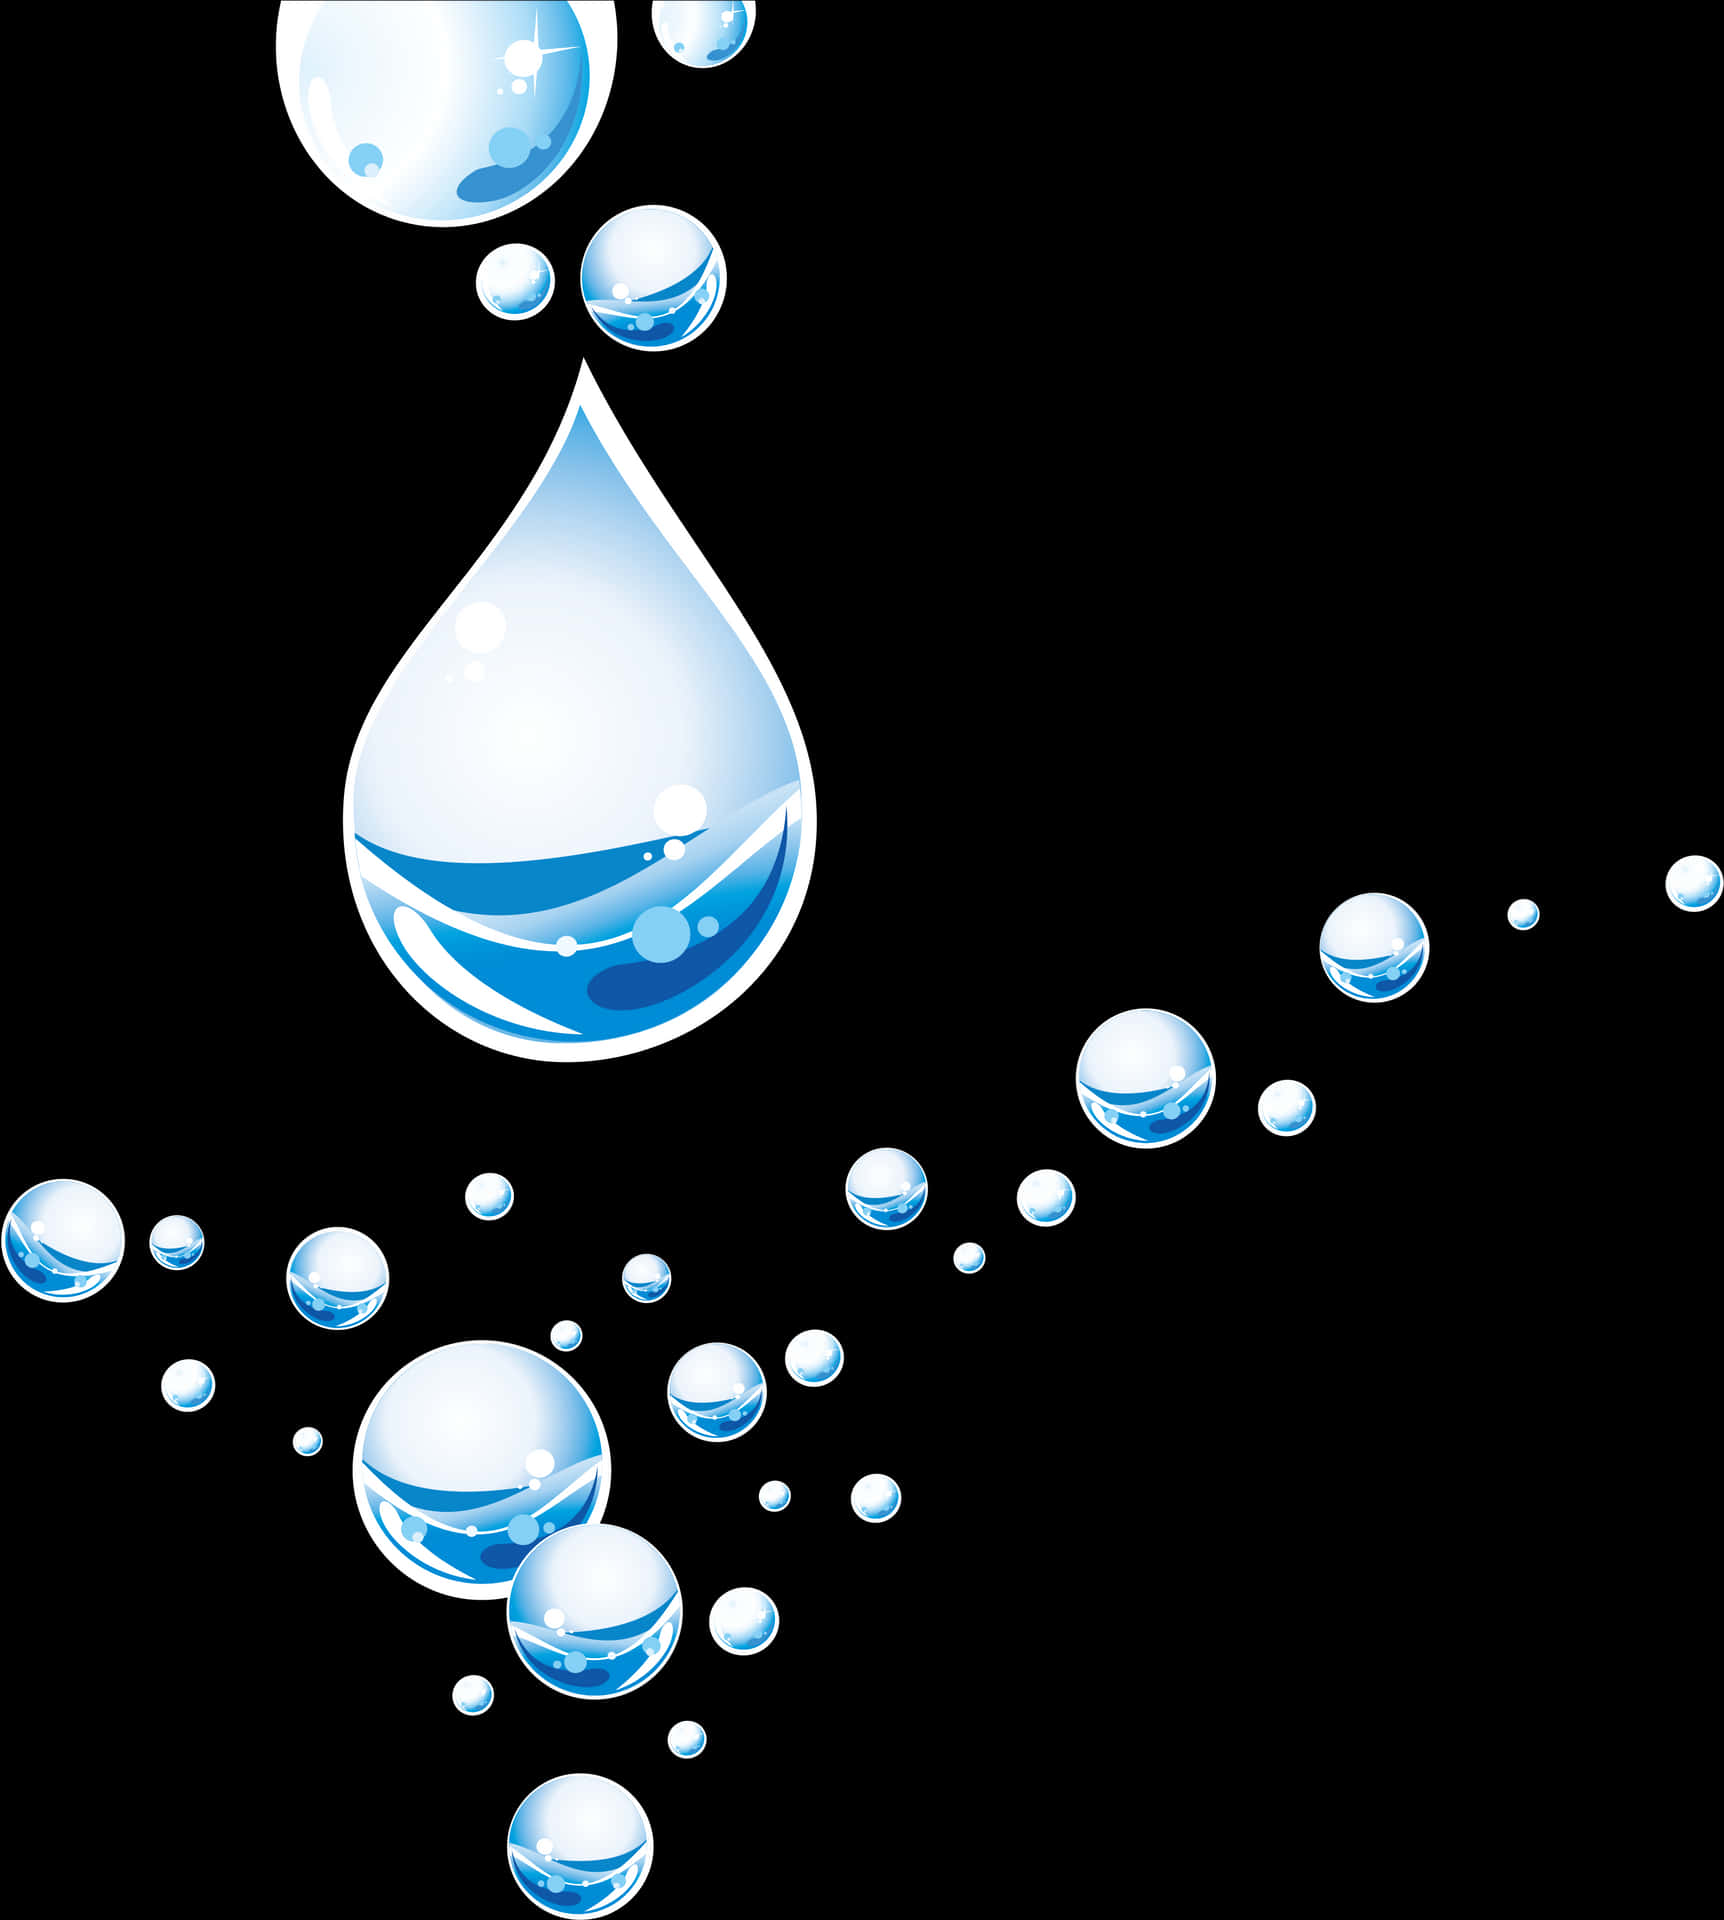 Water Dropletsand Bubbles Graphic PNG